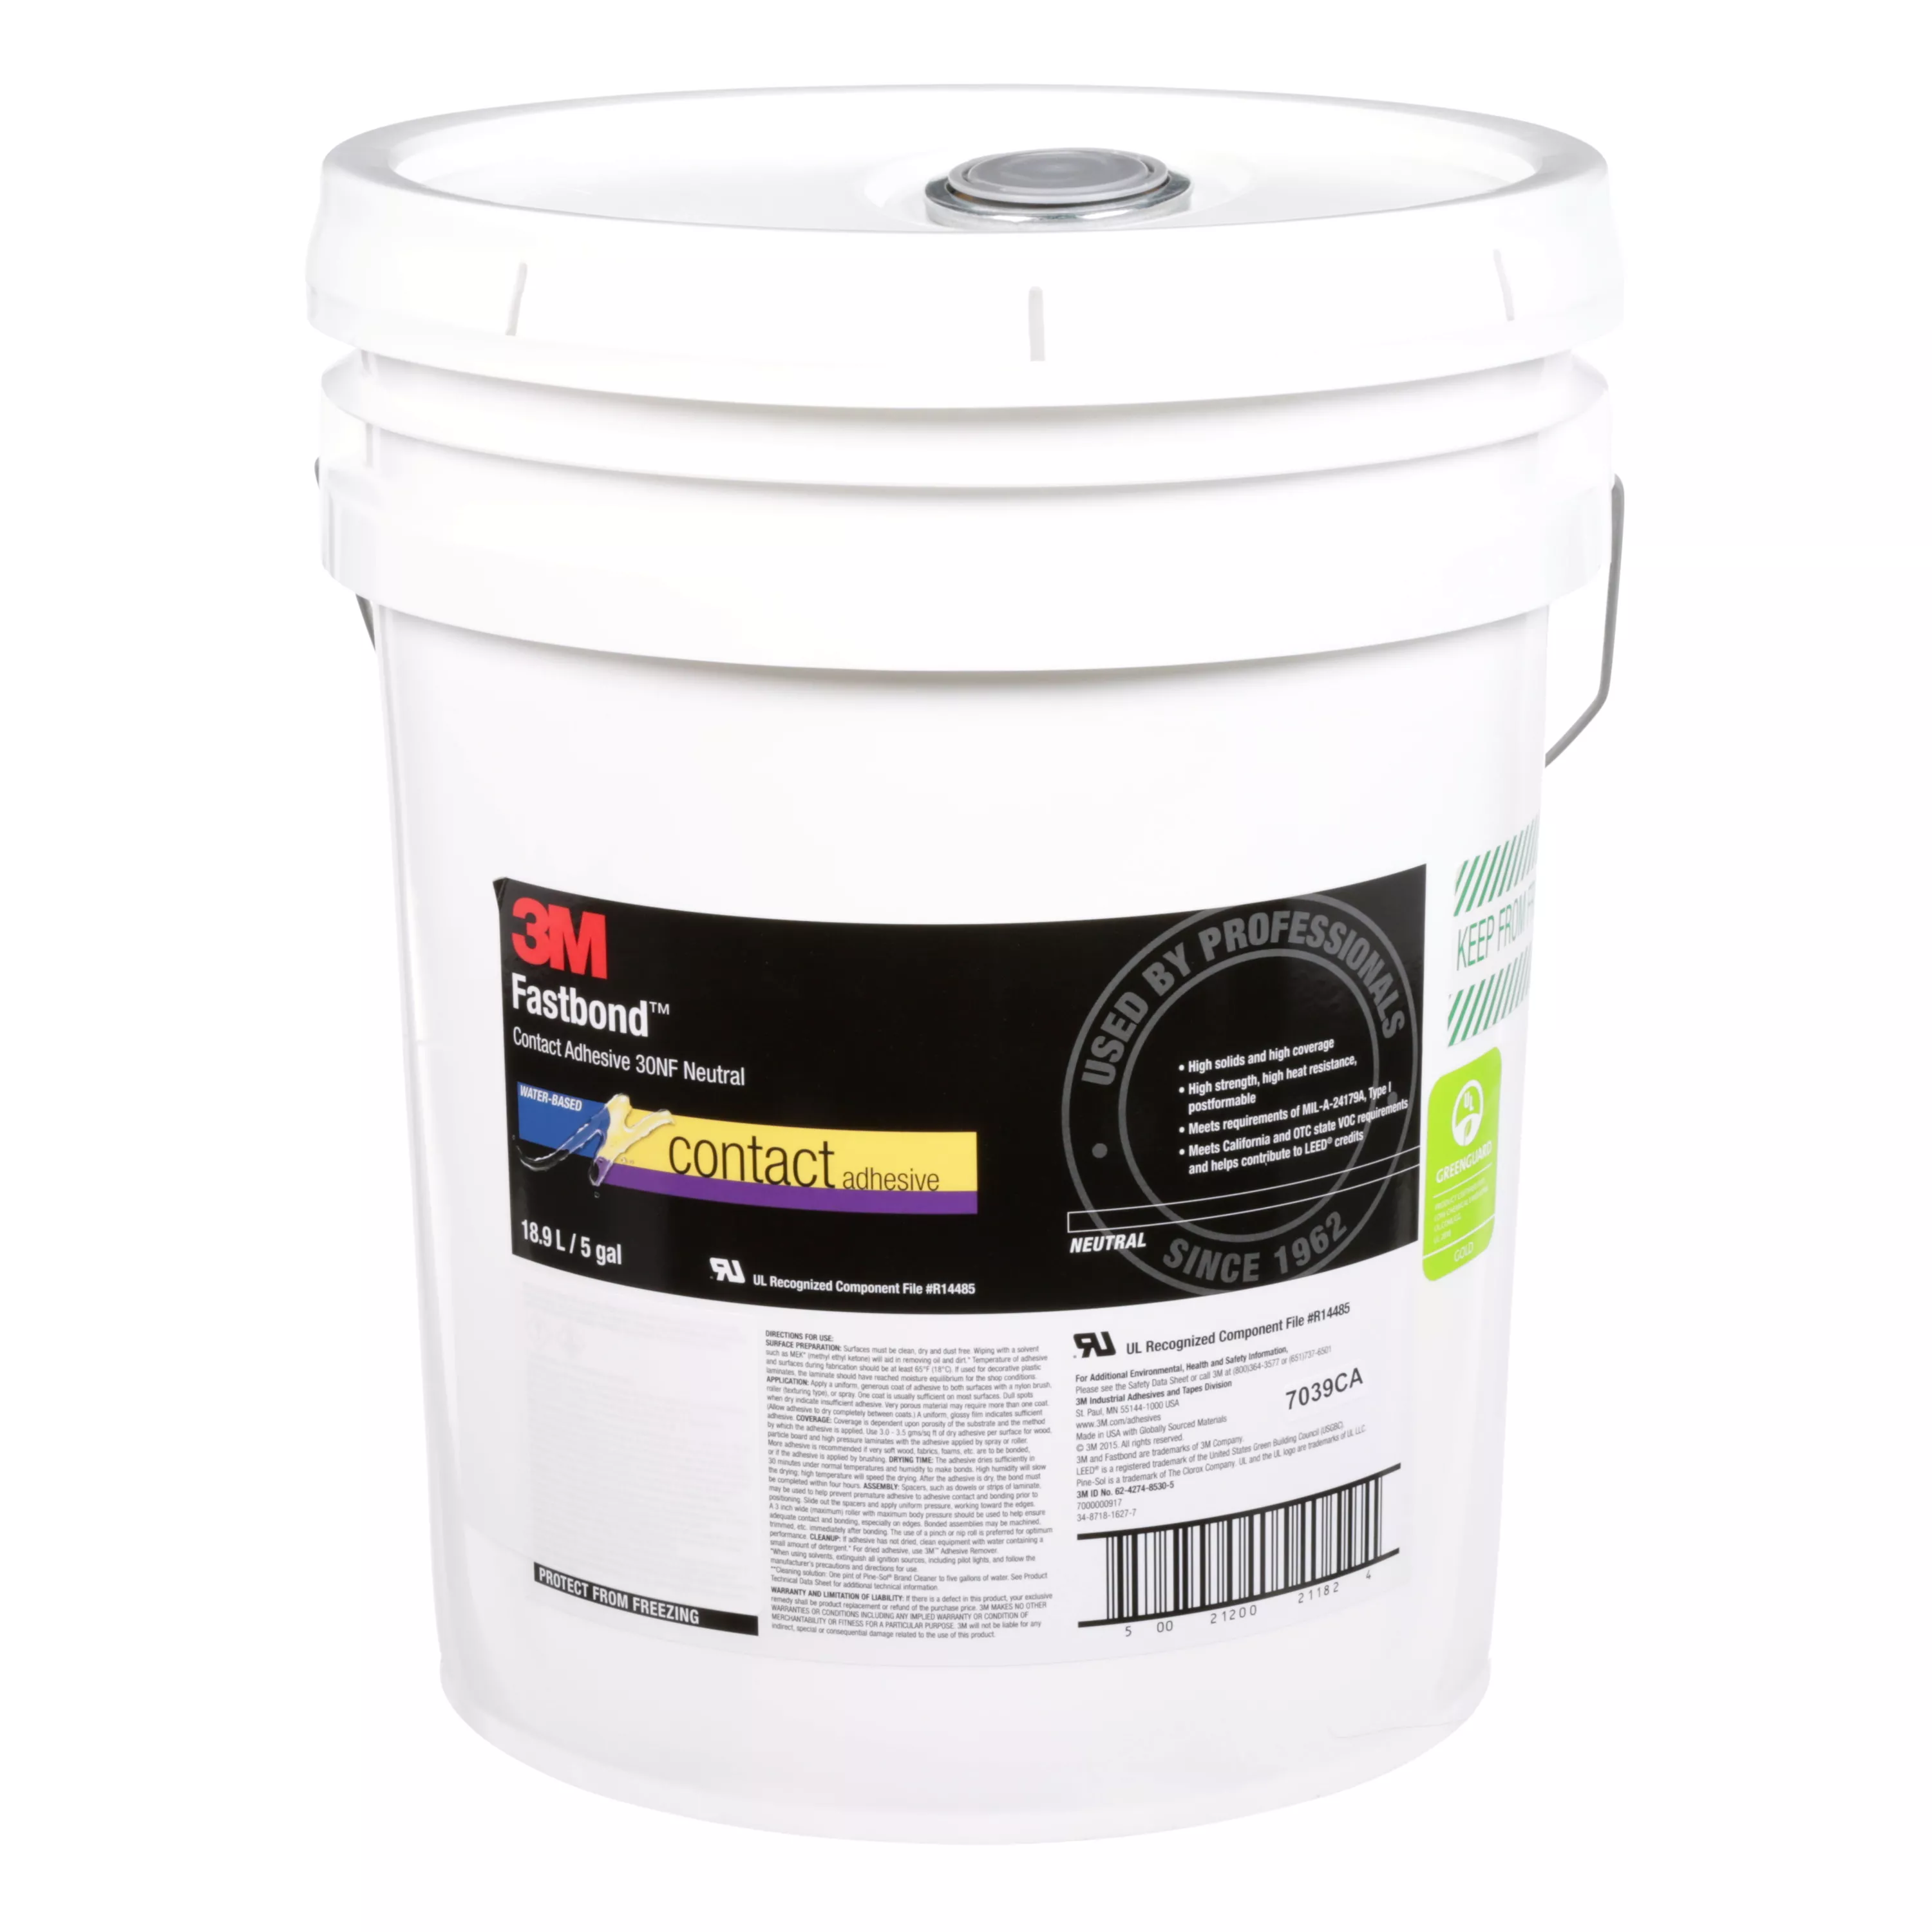 3M™ Fastbond™ Contact Adhesive 30NF, Neutral, 5 Gallon (Pail), 1
Can/Drum